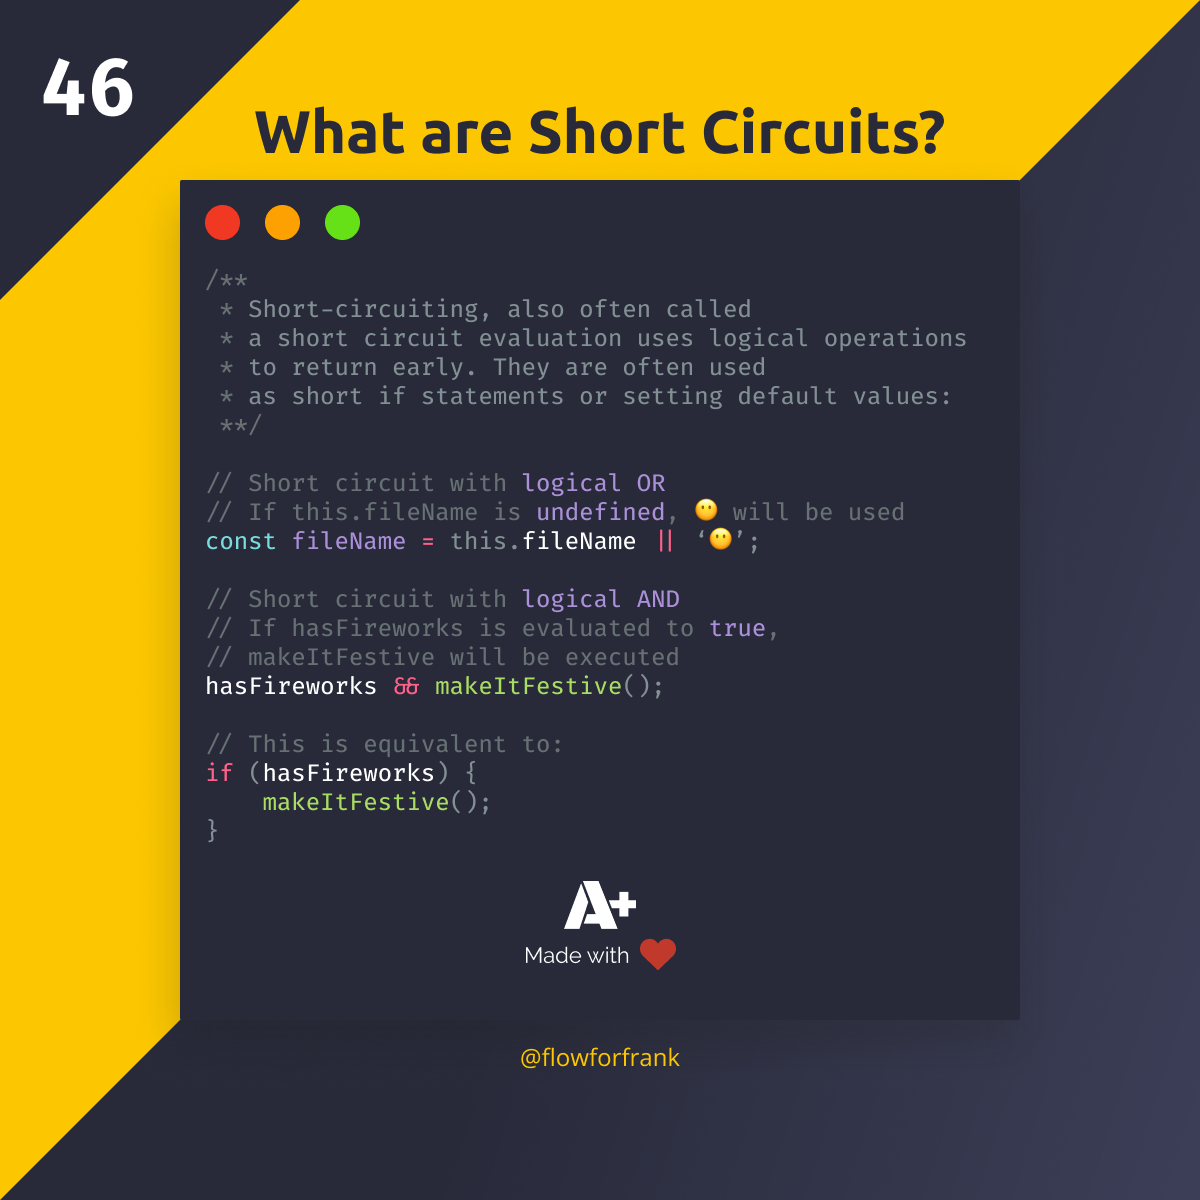 Why are Short Circuits?